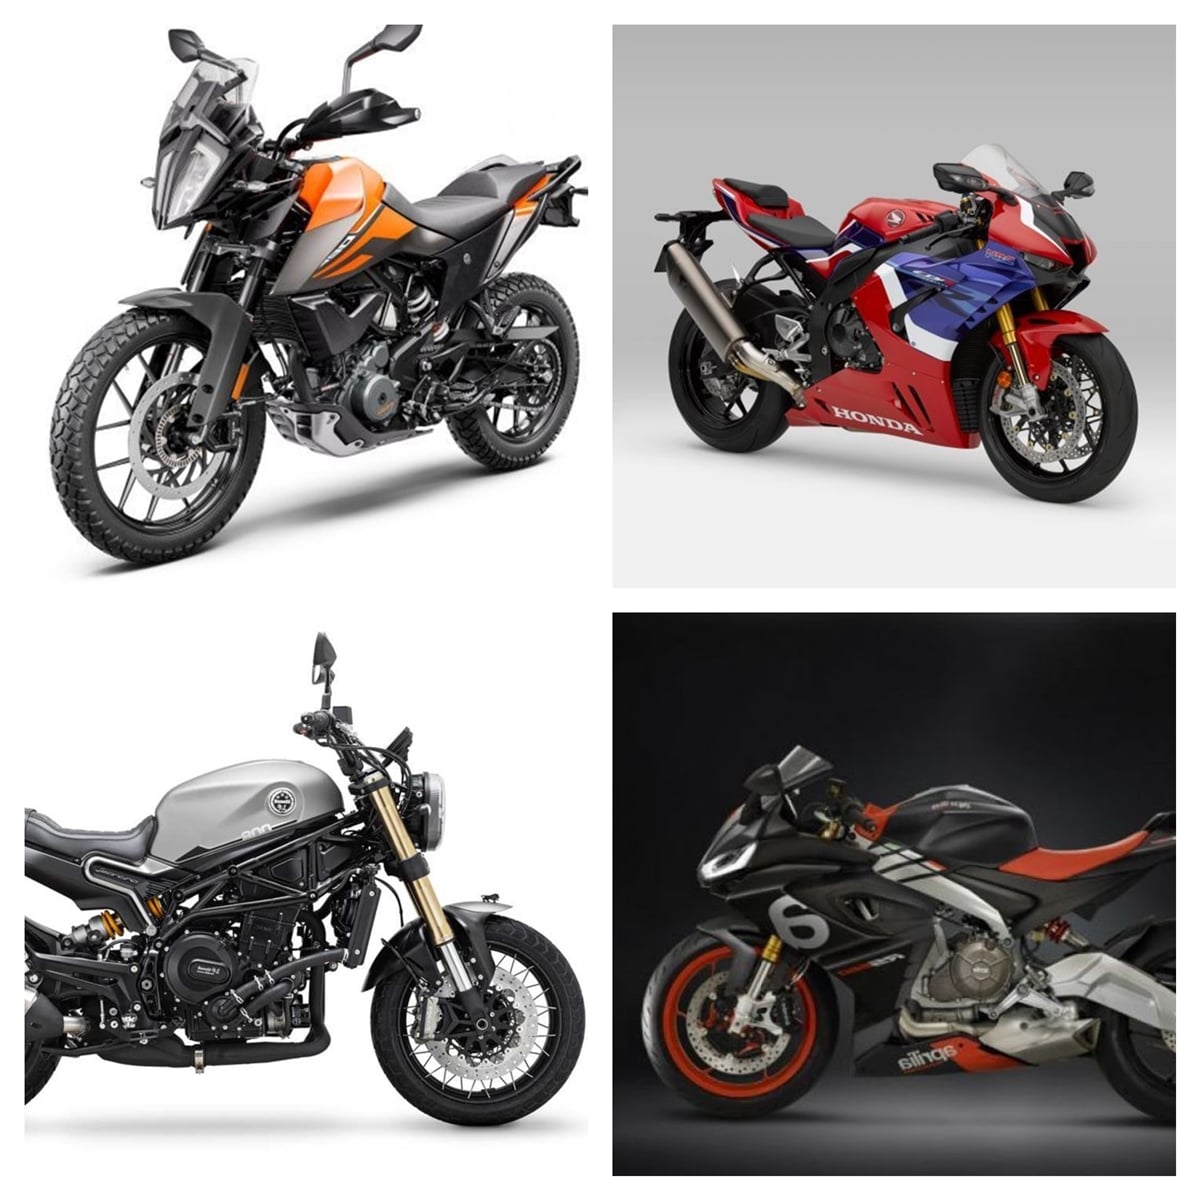 Top 10 Motorcycles from EICMA 2019 Coming to India